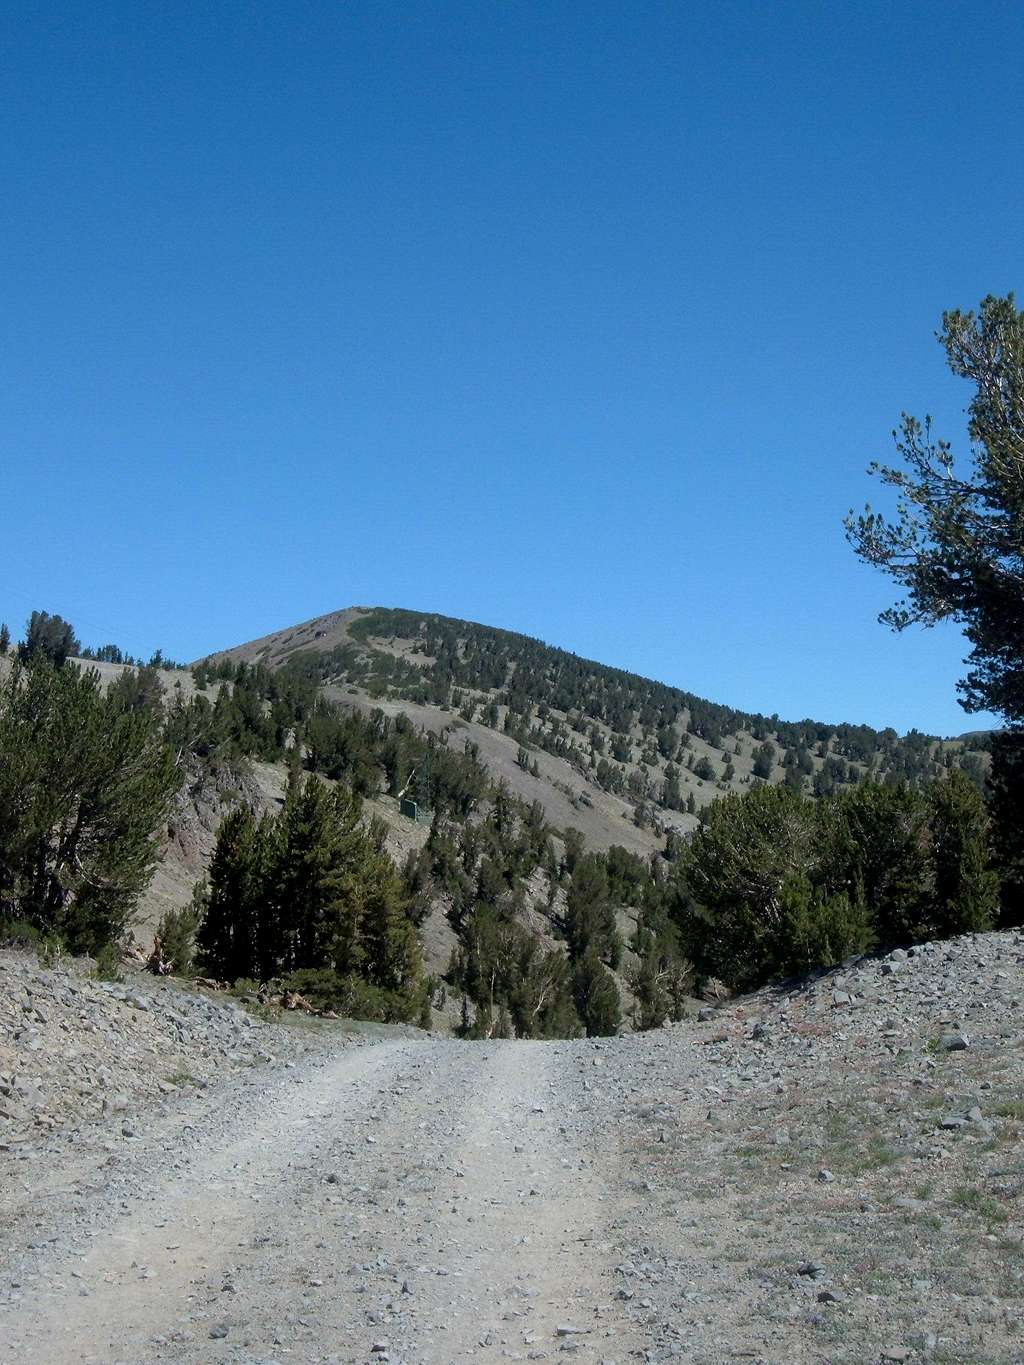  Mount Houghton from the Relay Peak Service Road